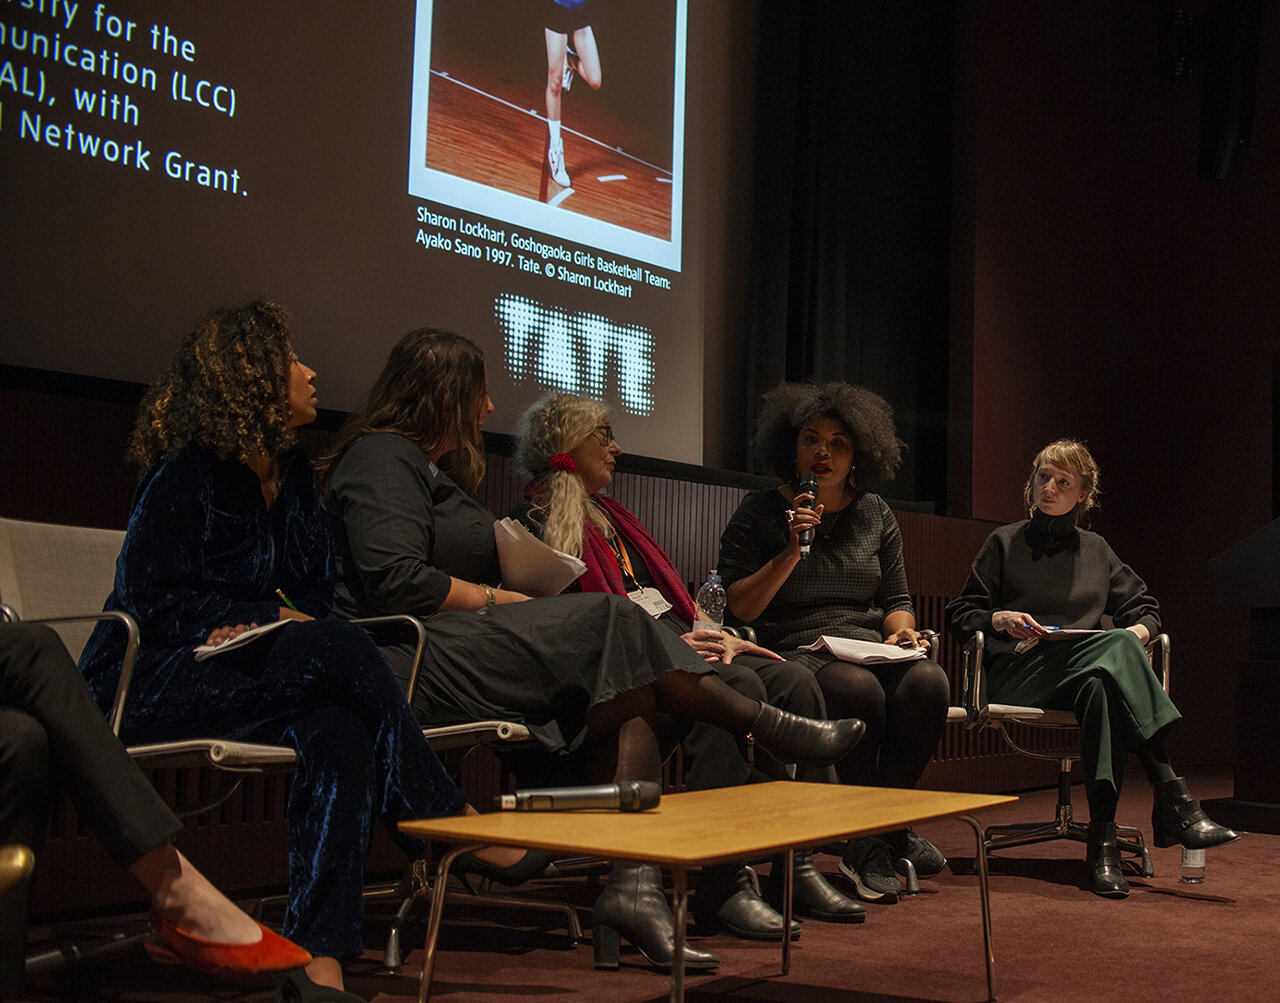  Panel discussion at Tate Modern during the “Fast Forward: How do Women Work” conference. 2019. Photo by Emily Light. 